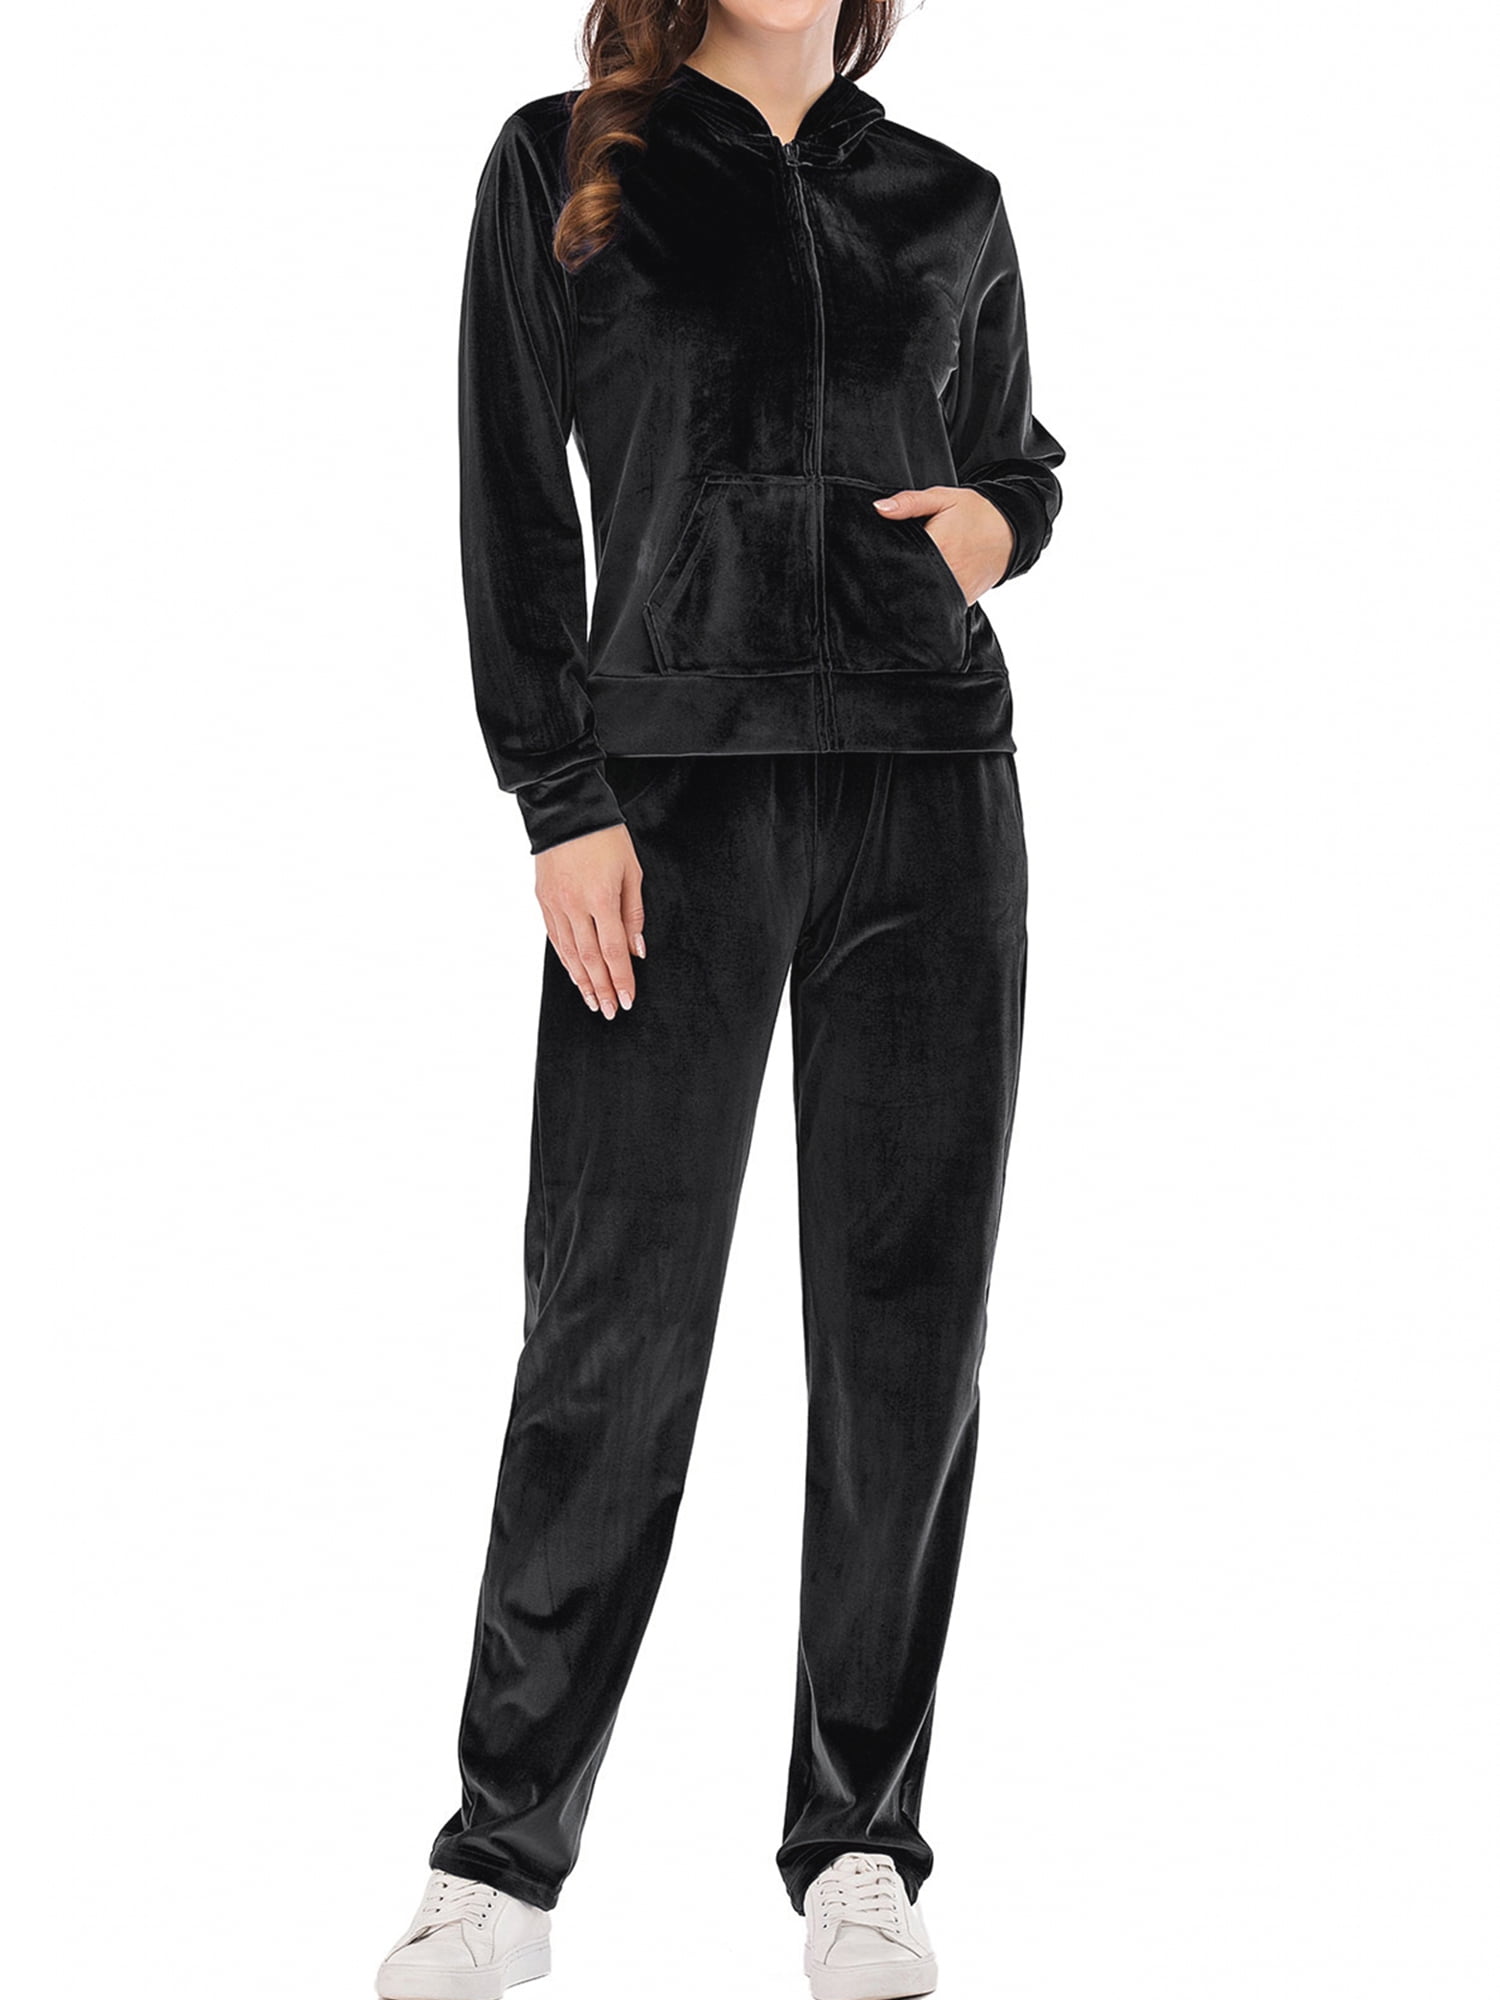 SHCKE Womens Velour Tracksuit Sets 2 Pieces Long Sleeve Sport Outfits ...